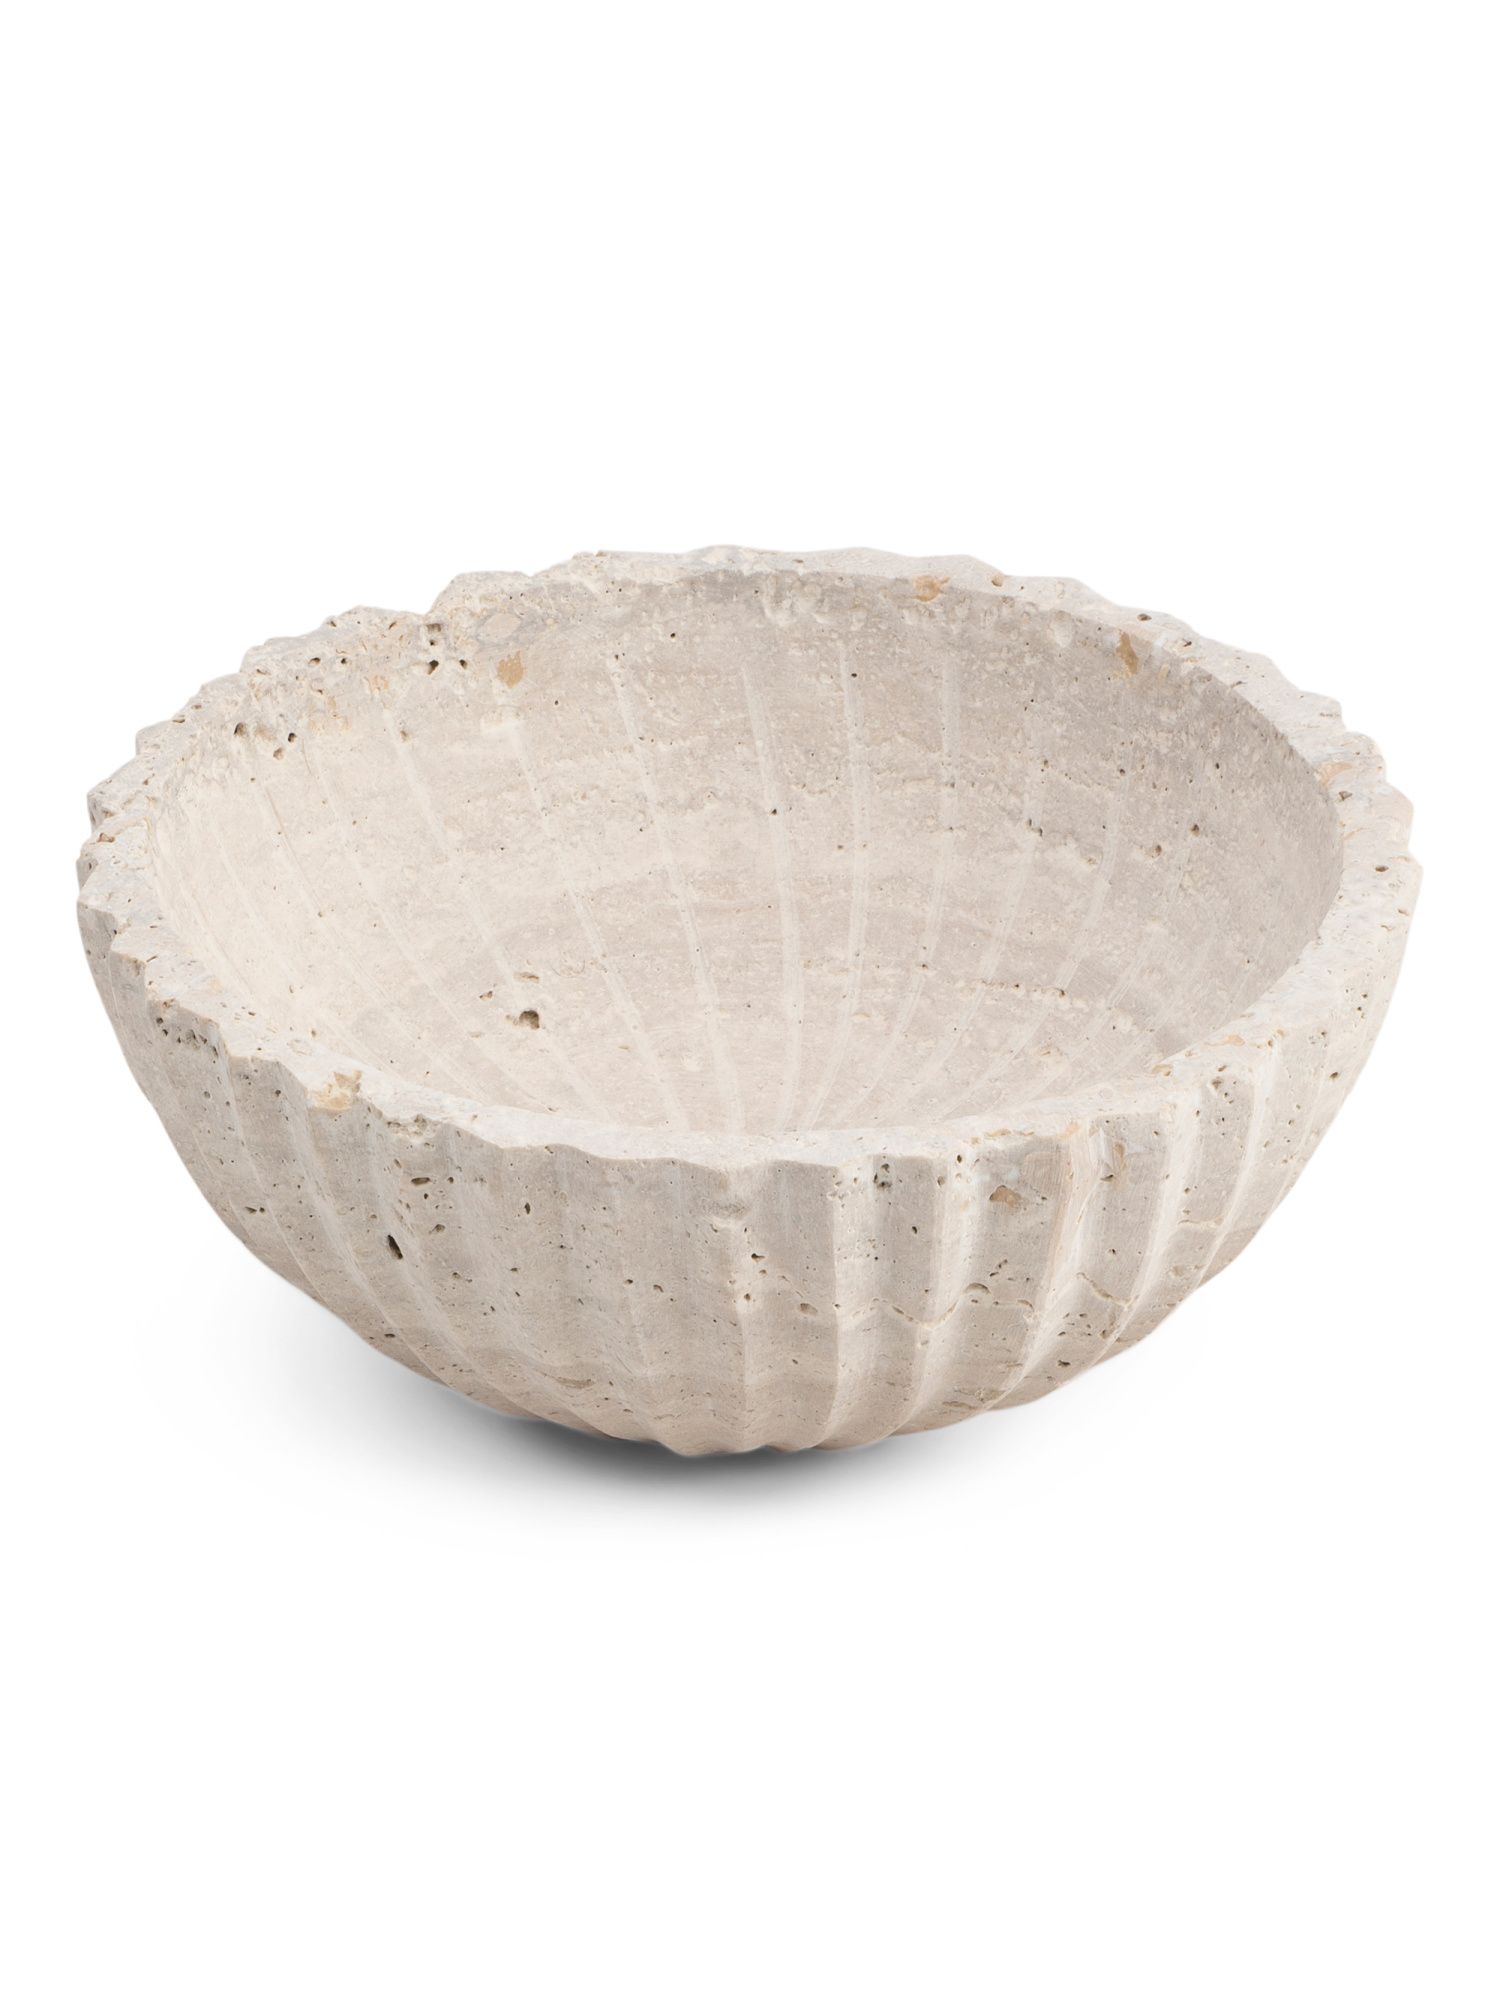 Travertine Fluted Fruit And Nut Bowl | TJ Maxx